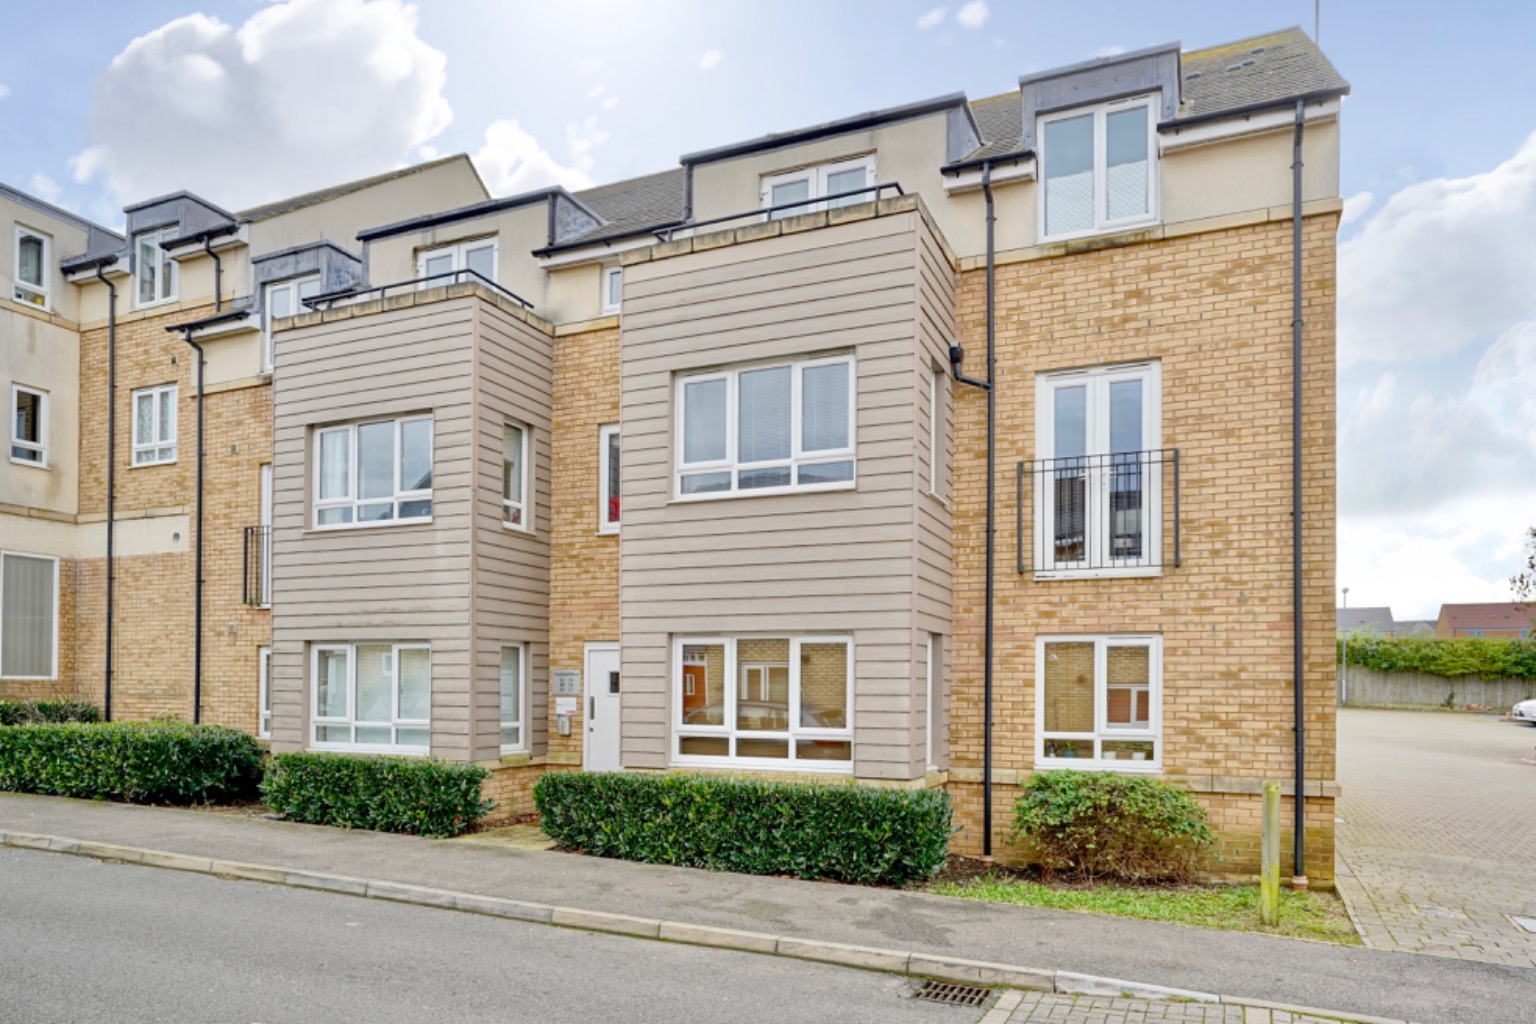 2 bed flat for sale in Cromwell Drive, Huntingdon - Property Image 1